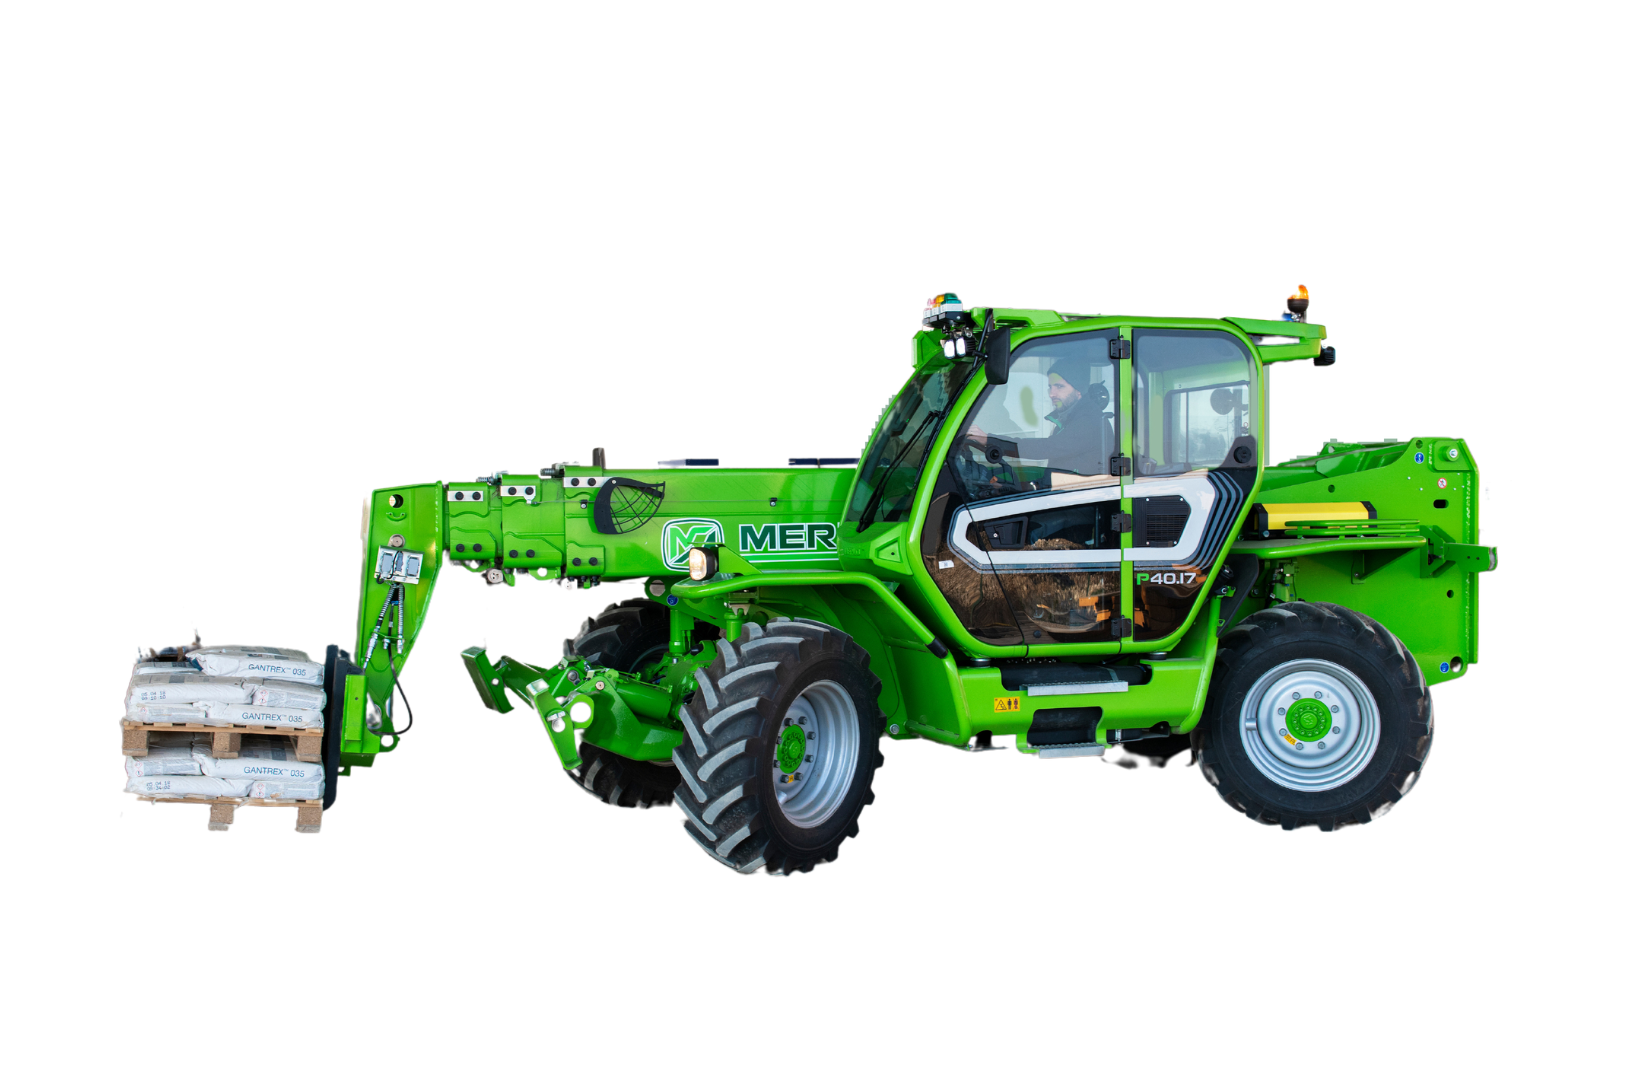 Merlo P40.17 PLUS stabilised telehandler, cut out. Carrying a pallet